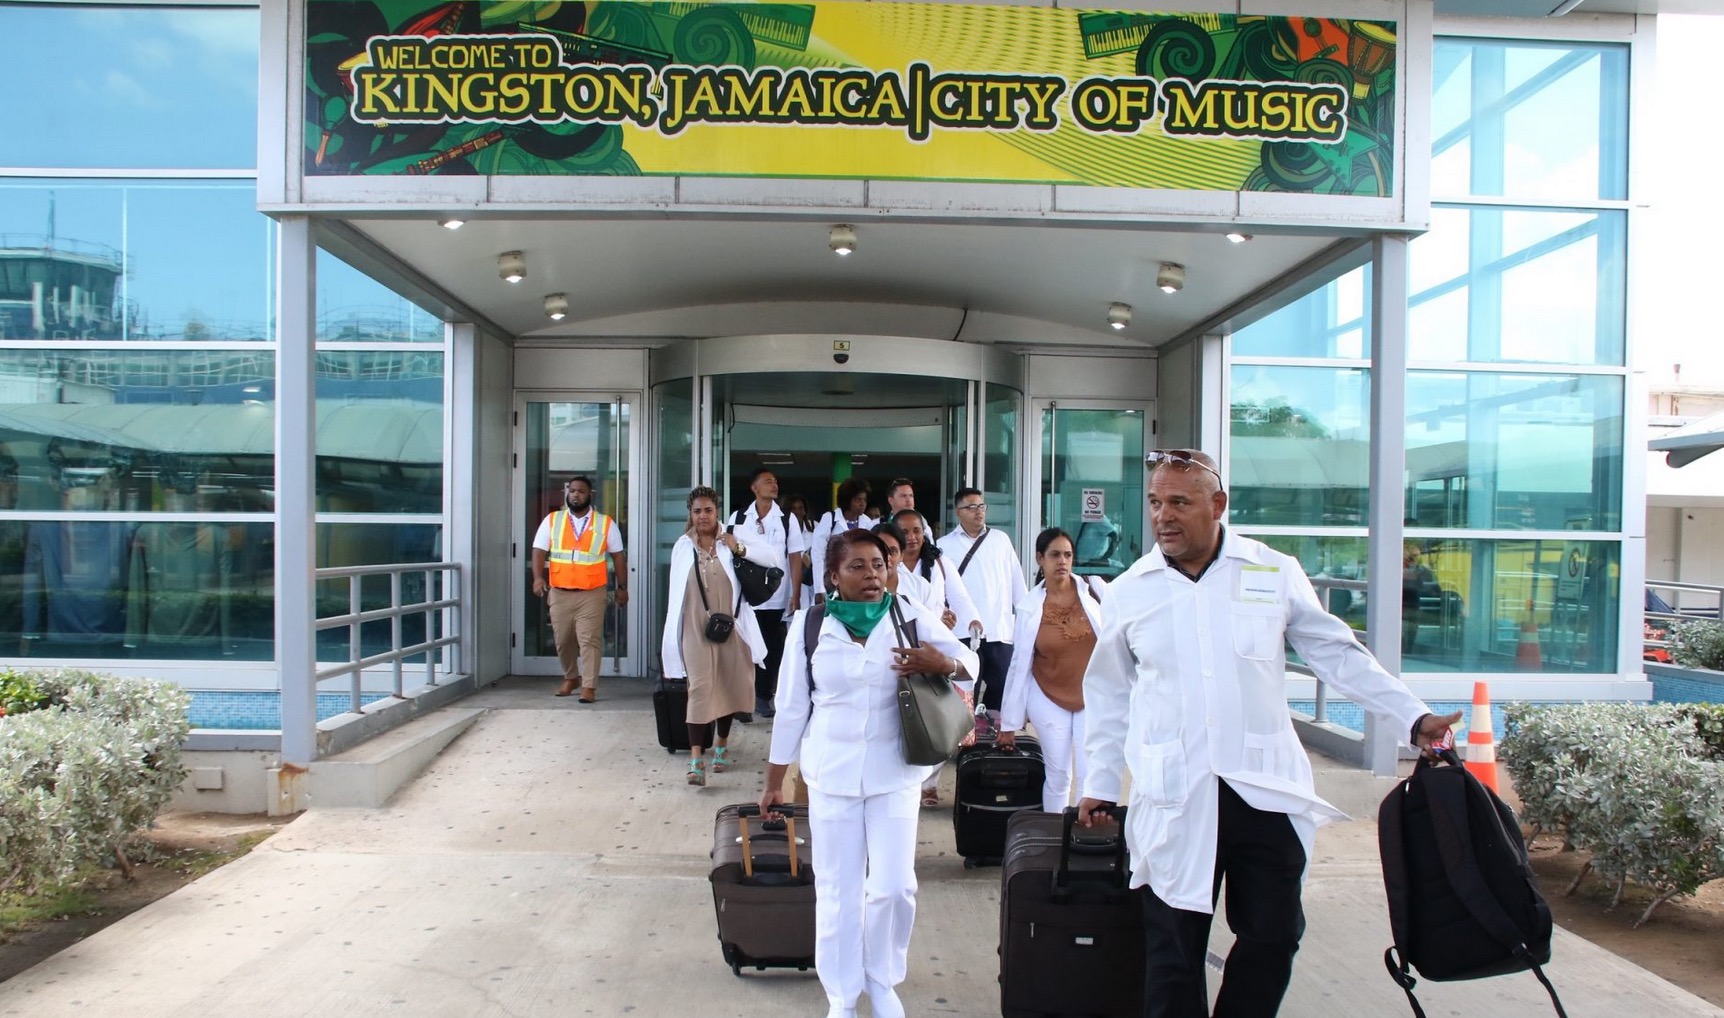 140 medical professionals from Cuba arrived in Jamaica